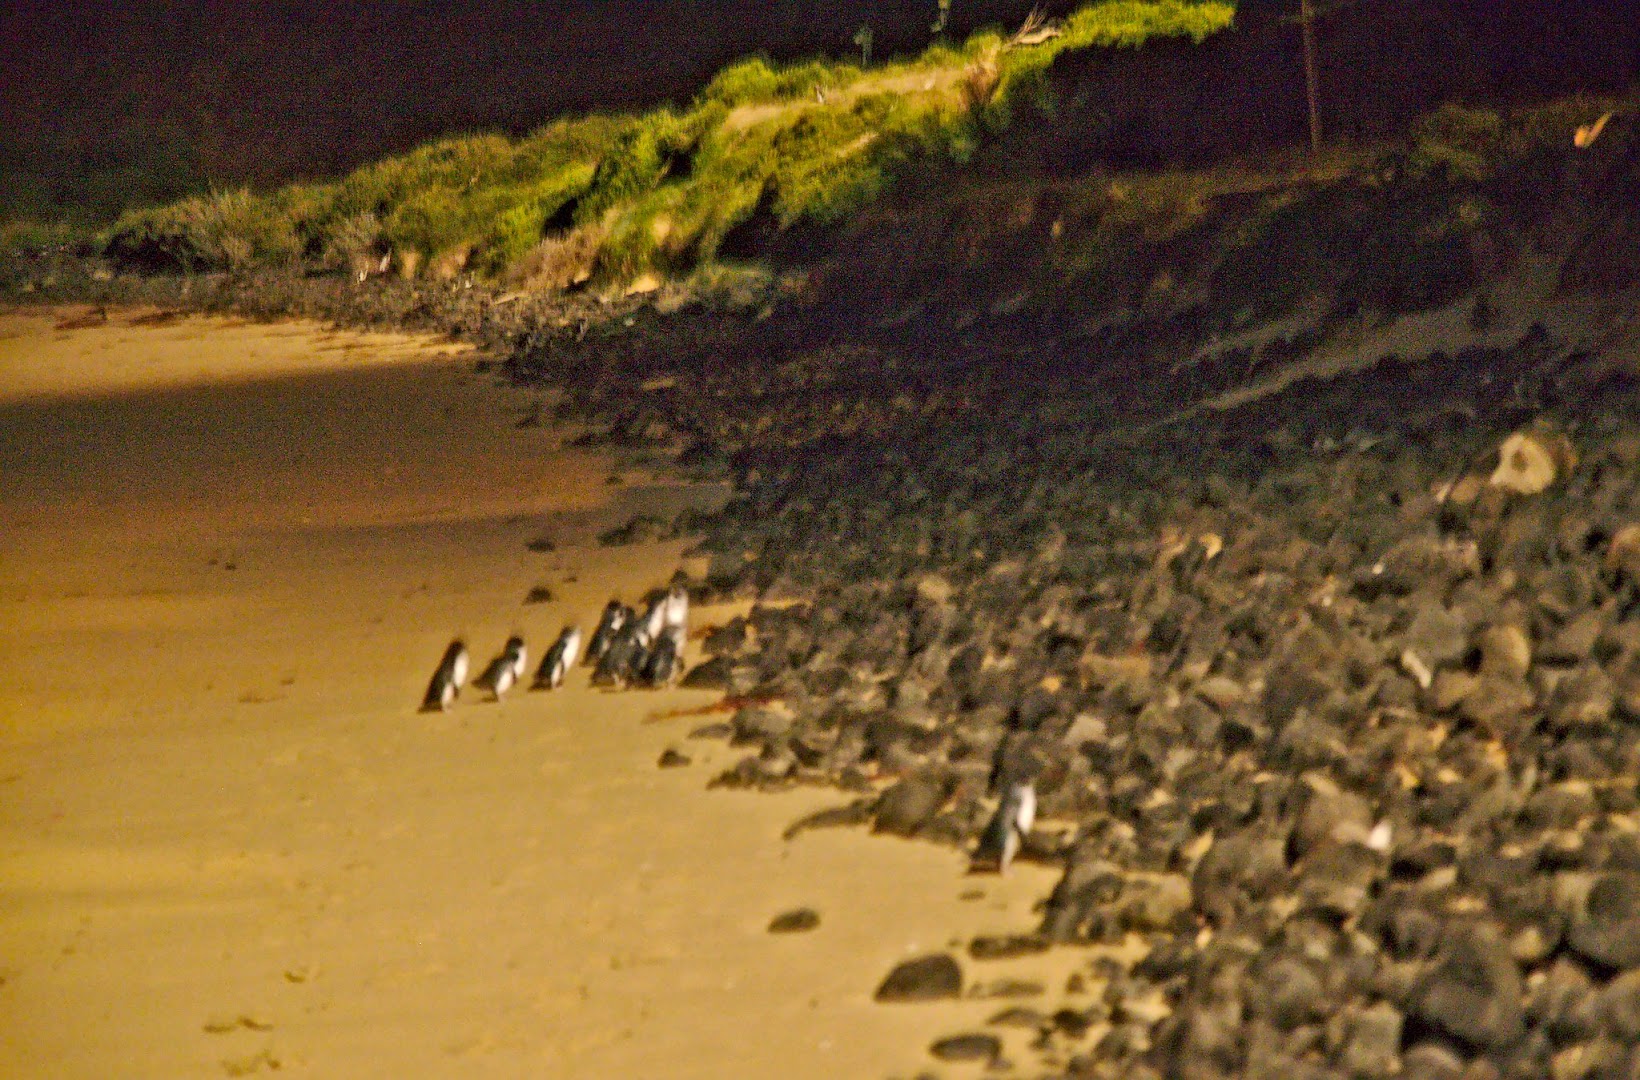 Penguins parading after dusk on Phillip Island, a view worth $54